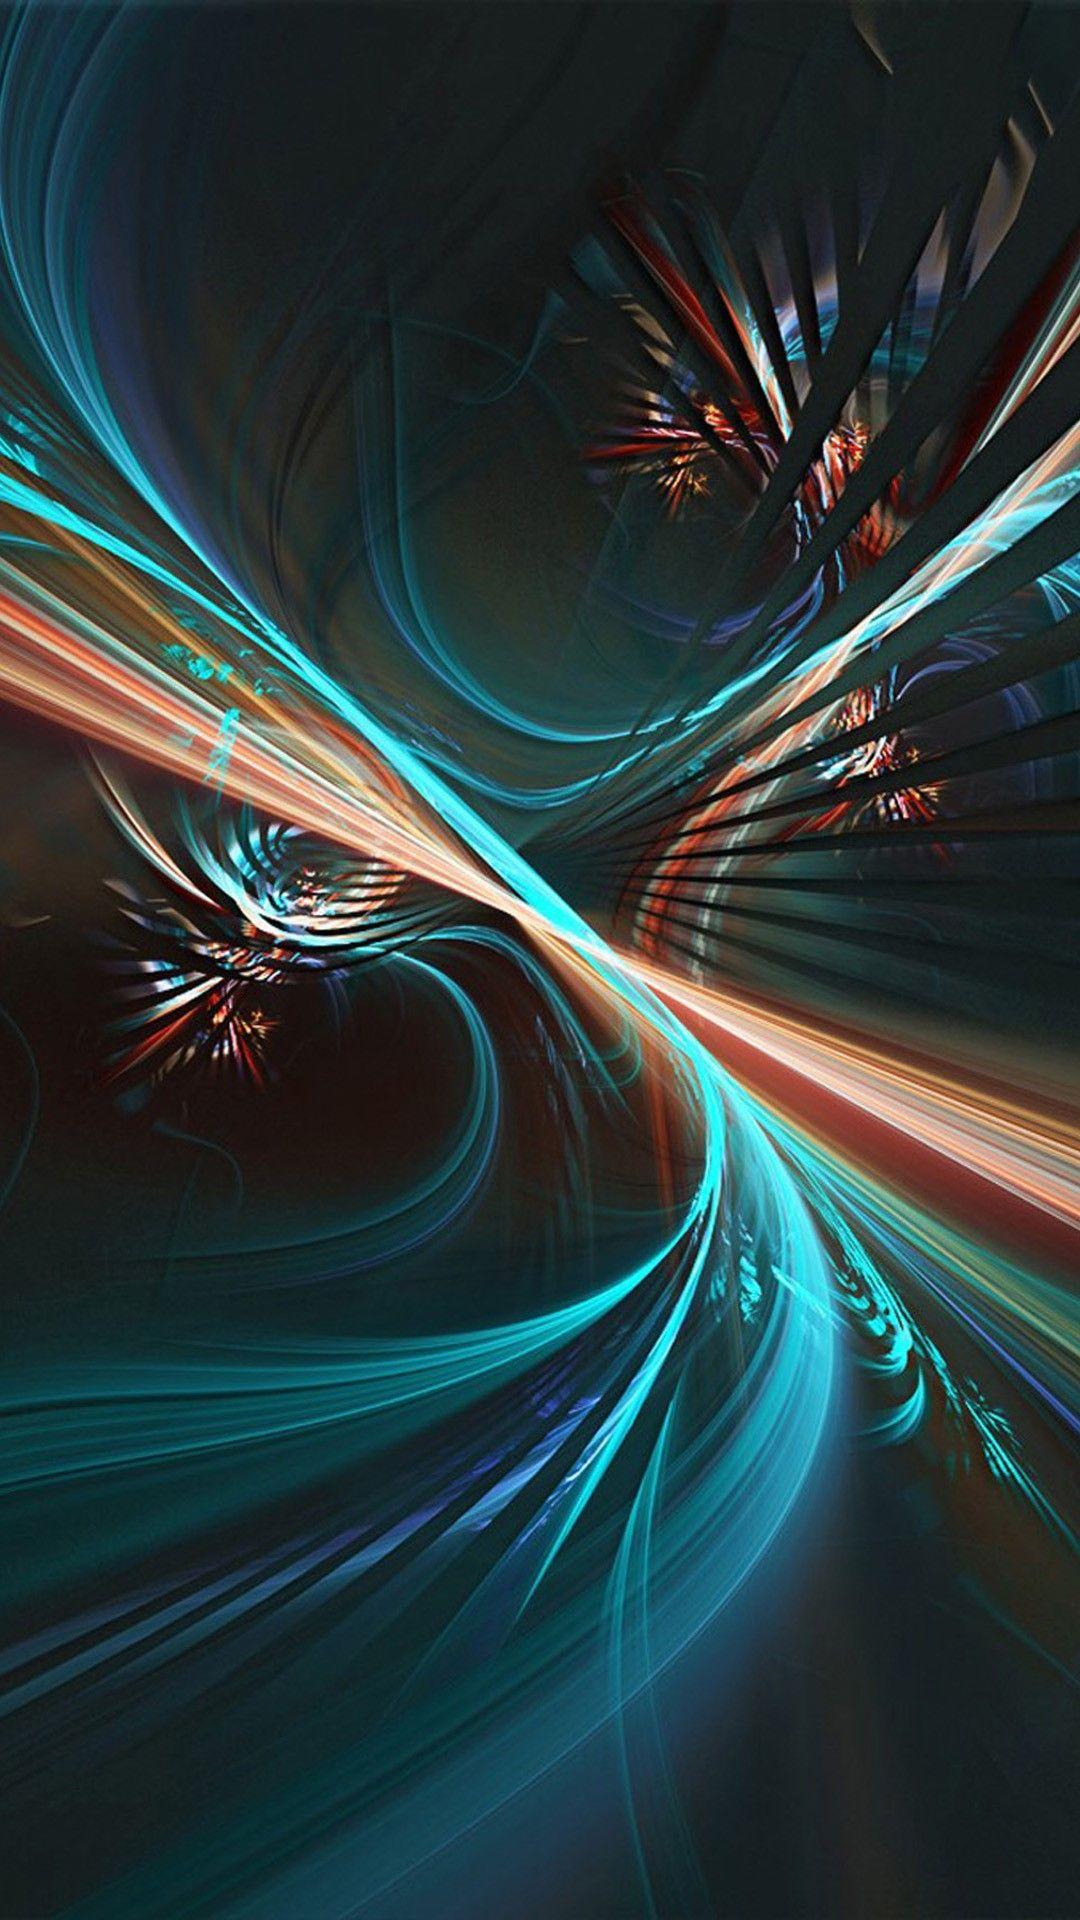  Abstract  Phone Wallpapers  Wallpaper  Cave